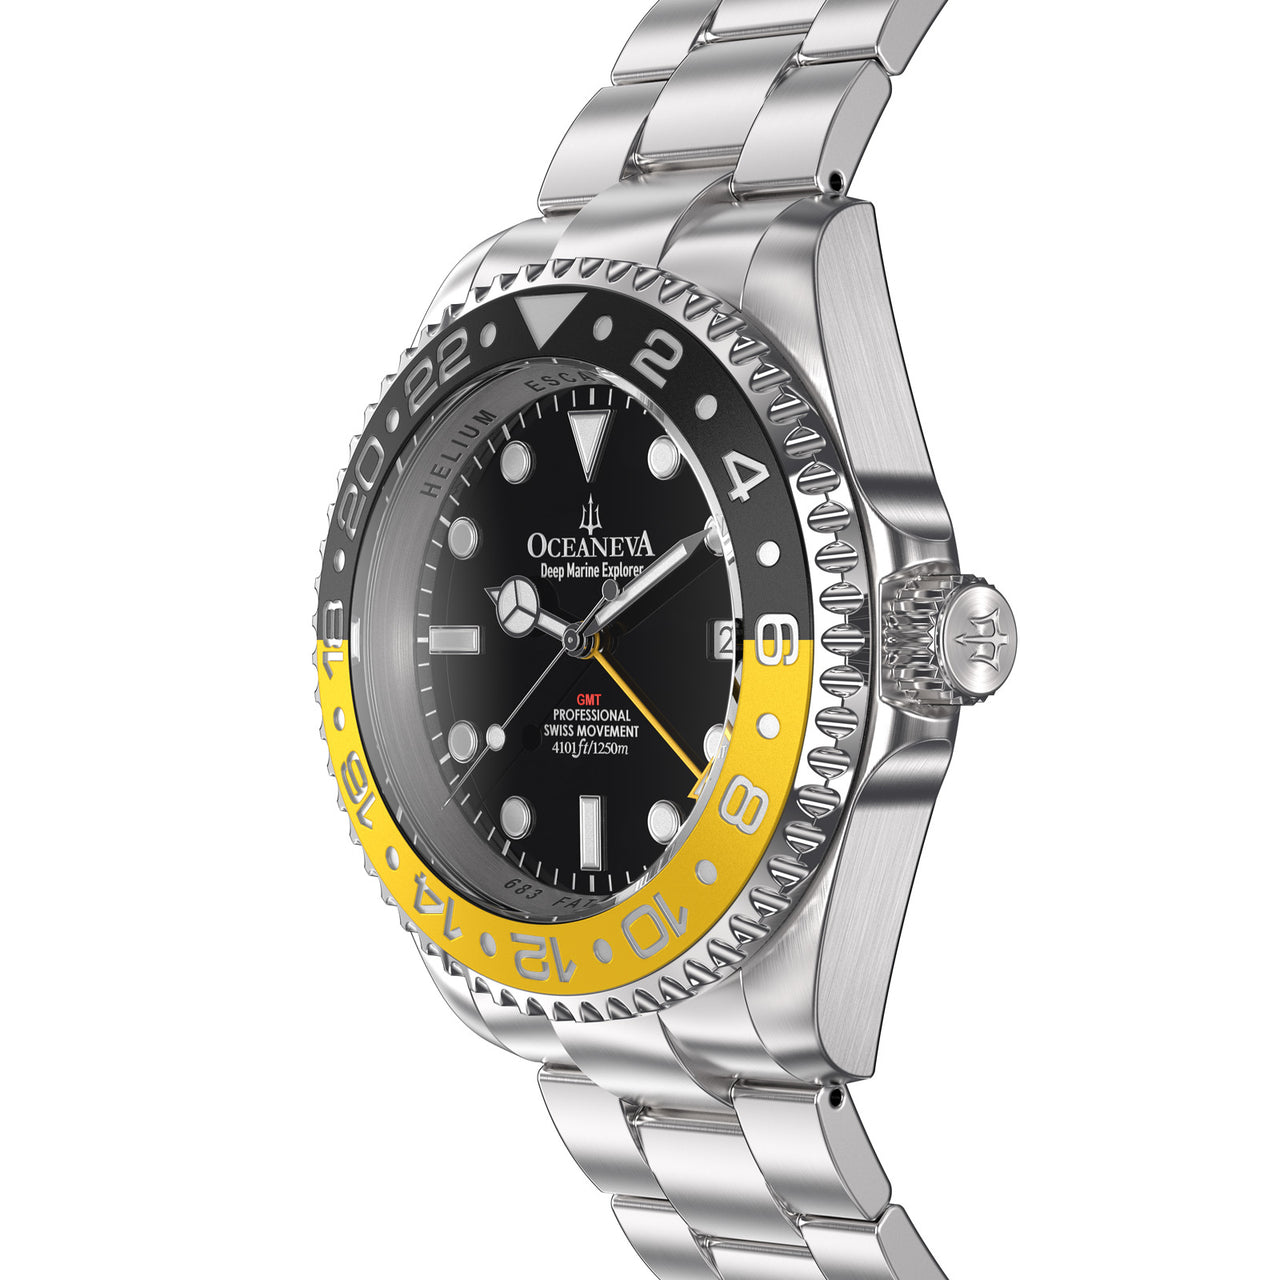 Oceaneva 1250M GMT Dive Watch Black And Yellow Side View Crown